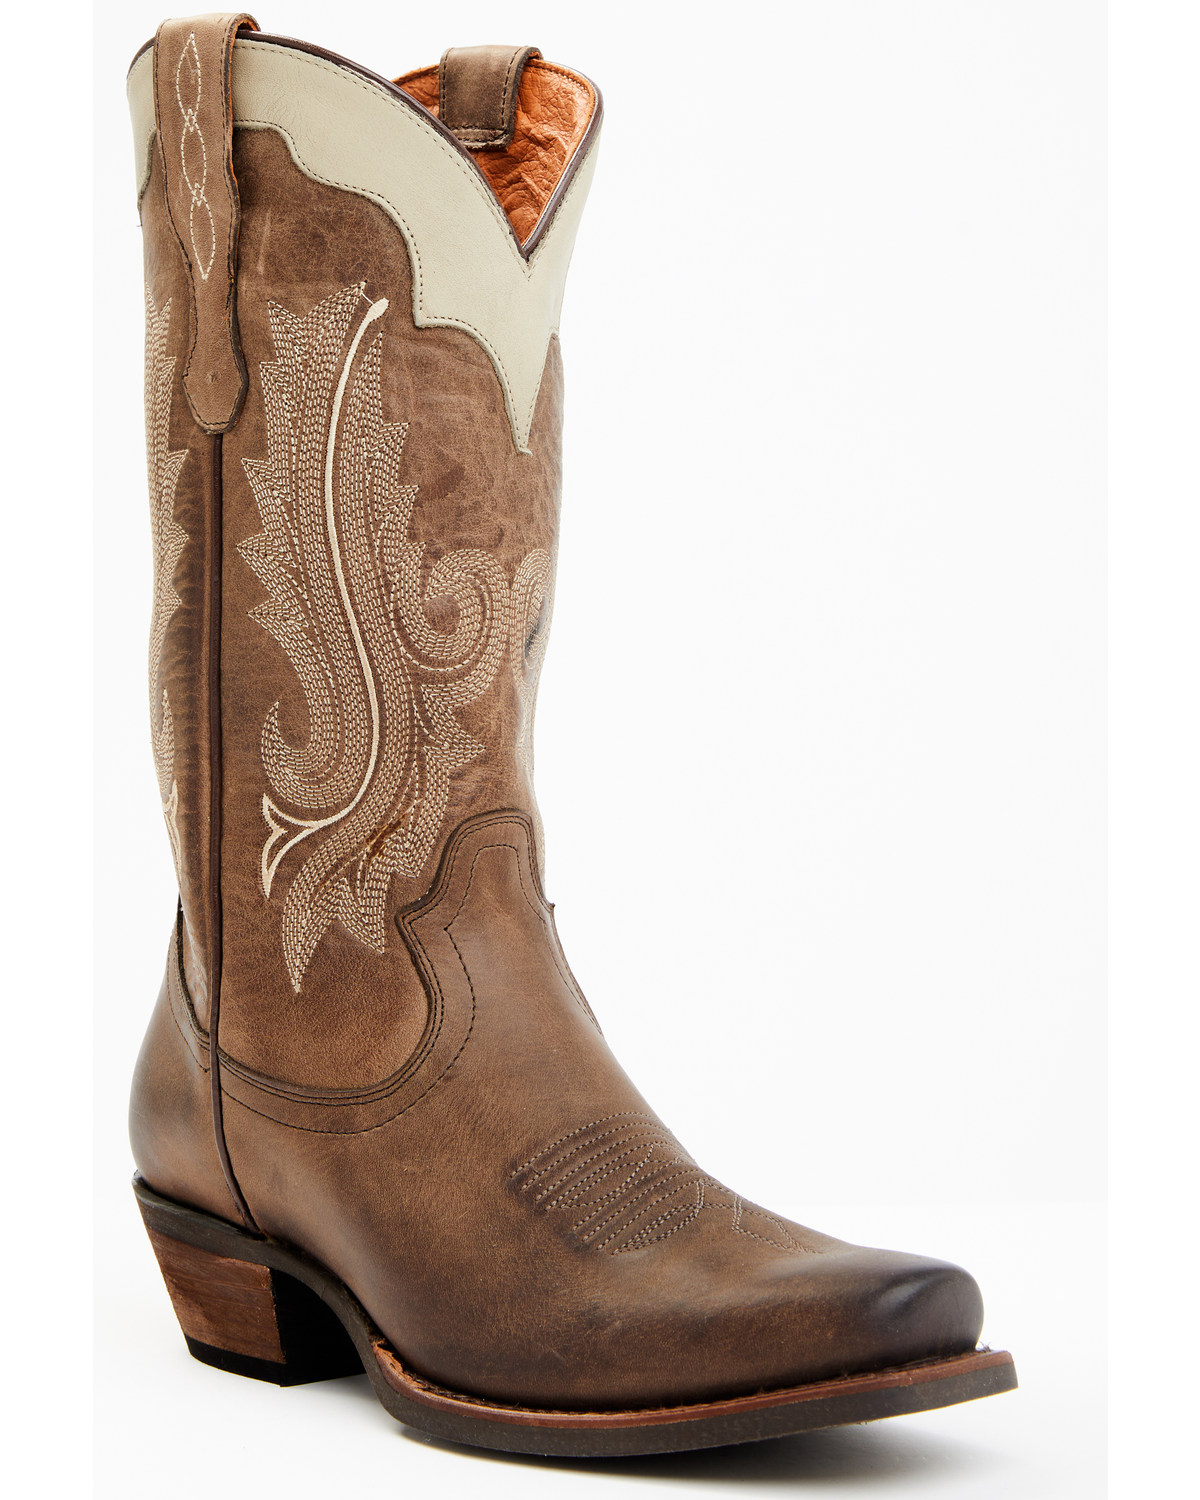 Idyllwind Women's Lawless Western Performance Boots - Square Toe